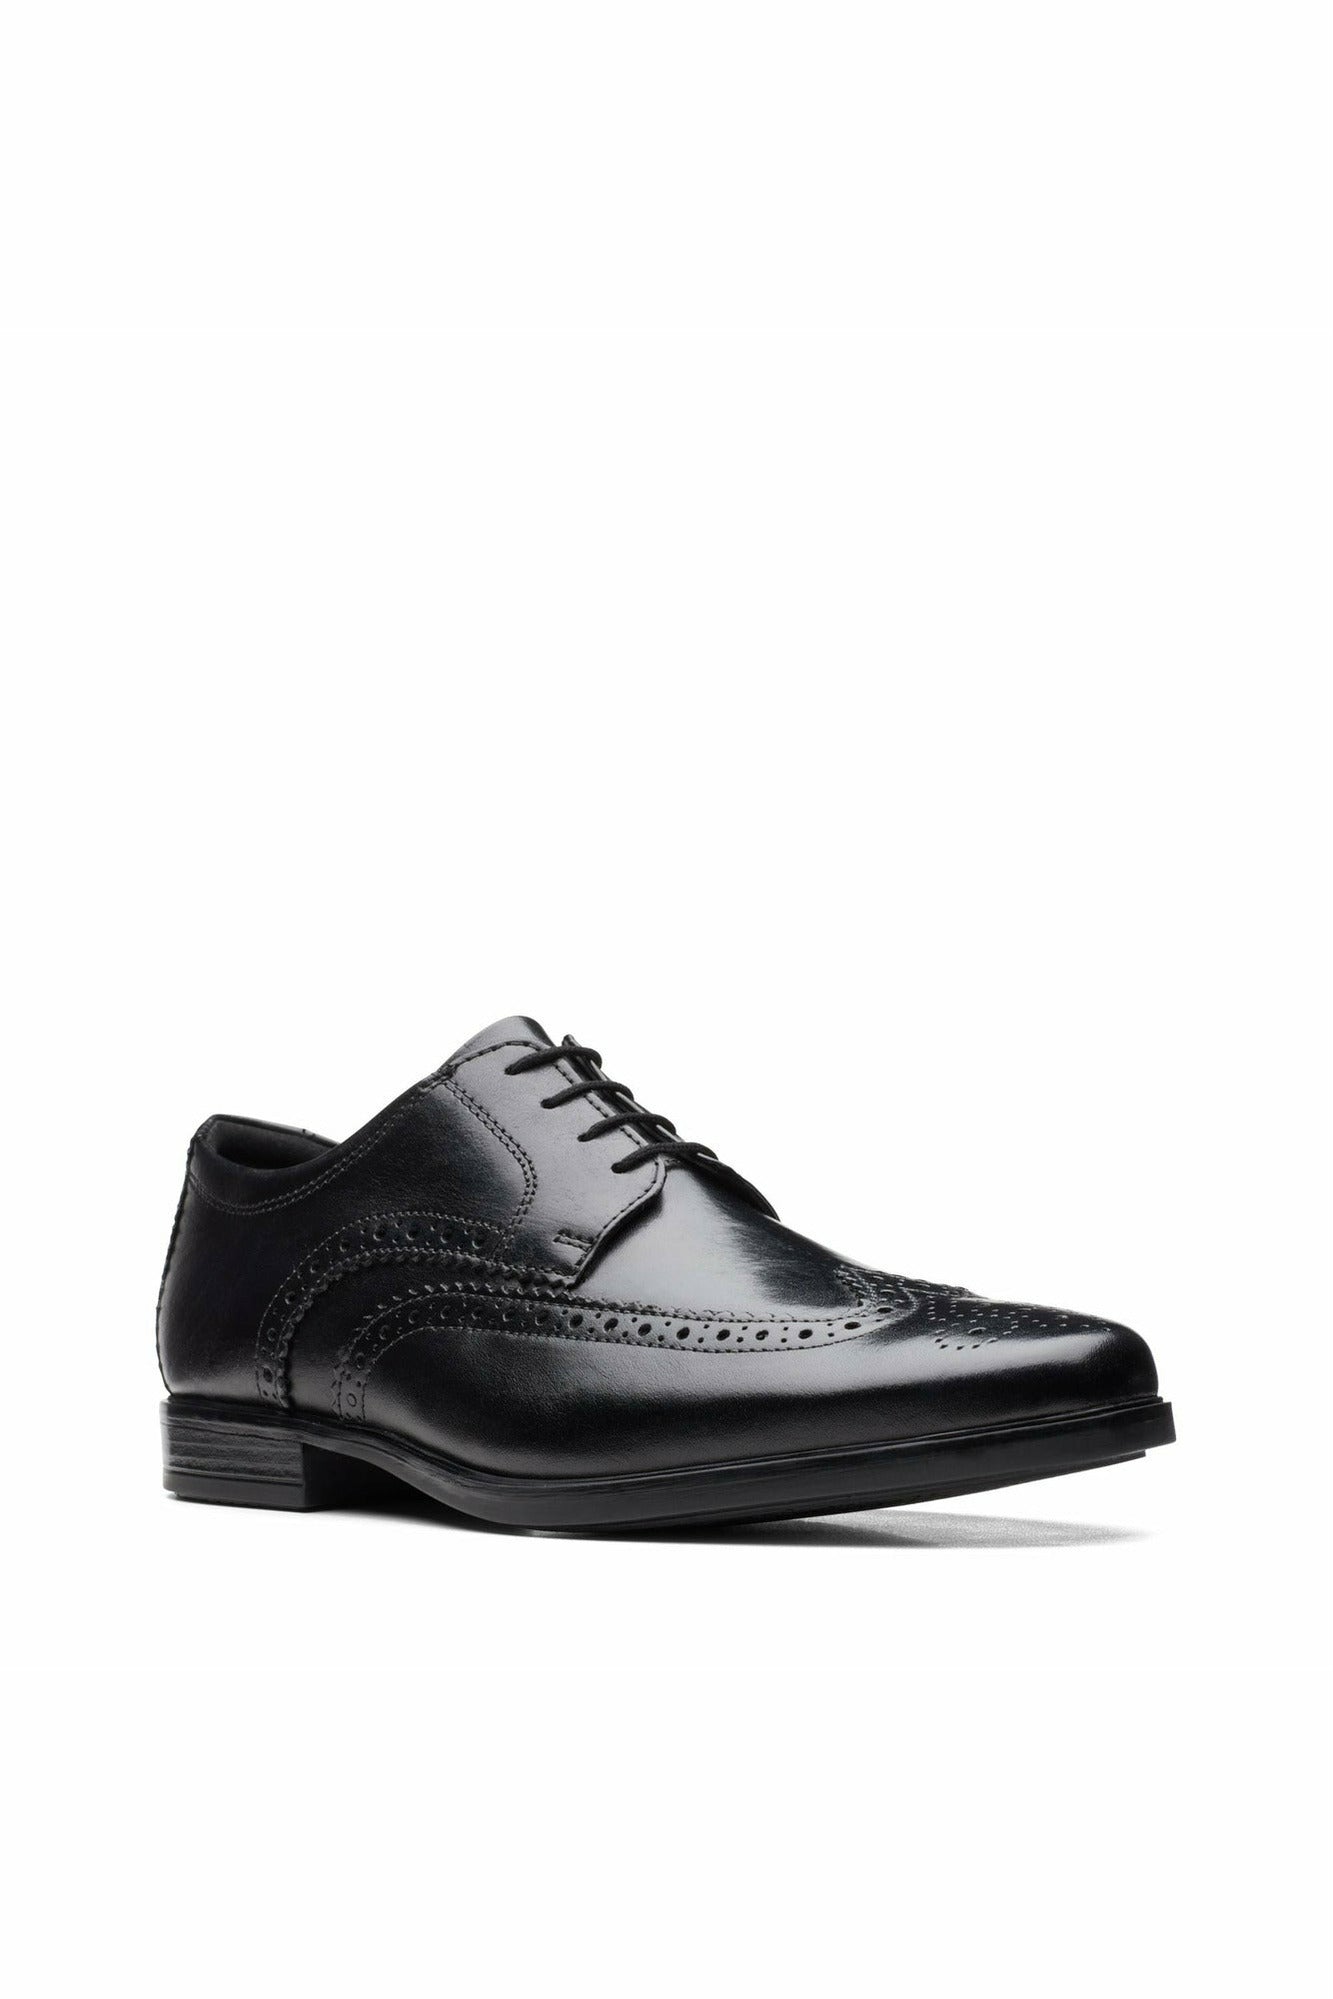 Clarks Howard Wing black leather